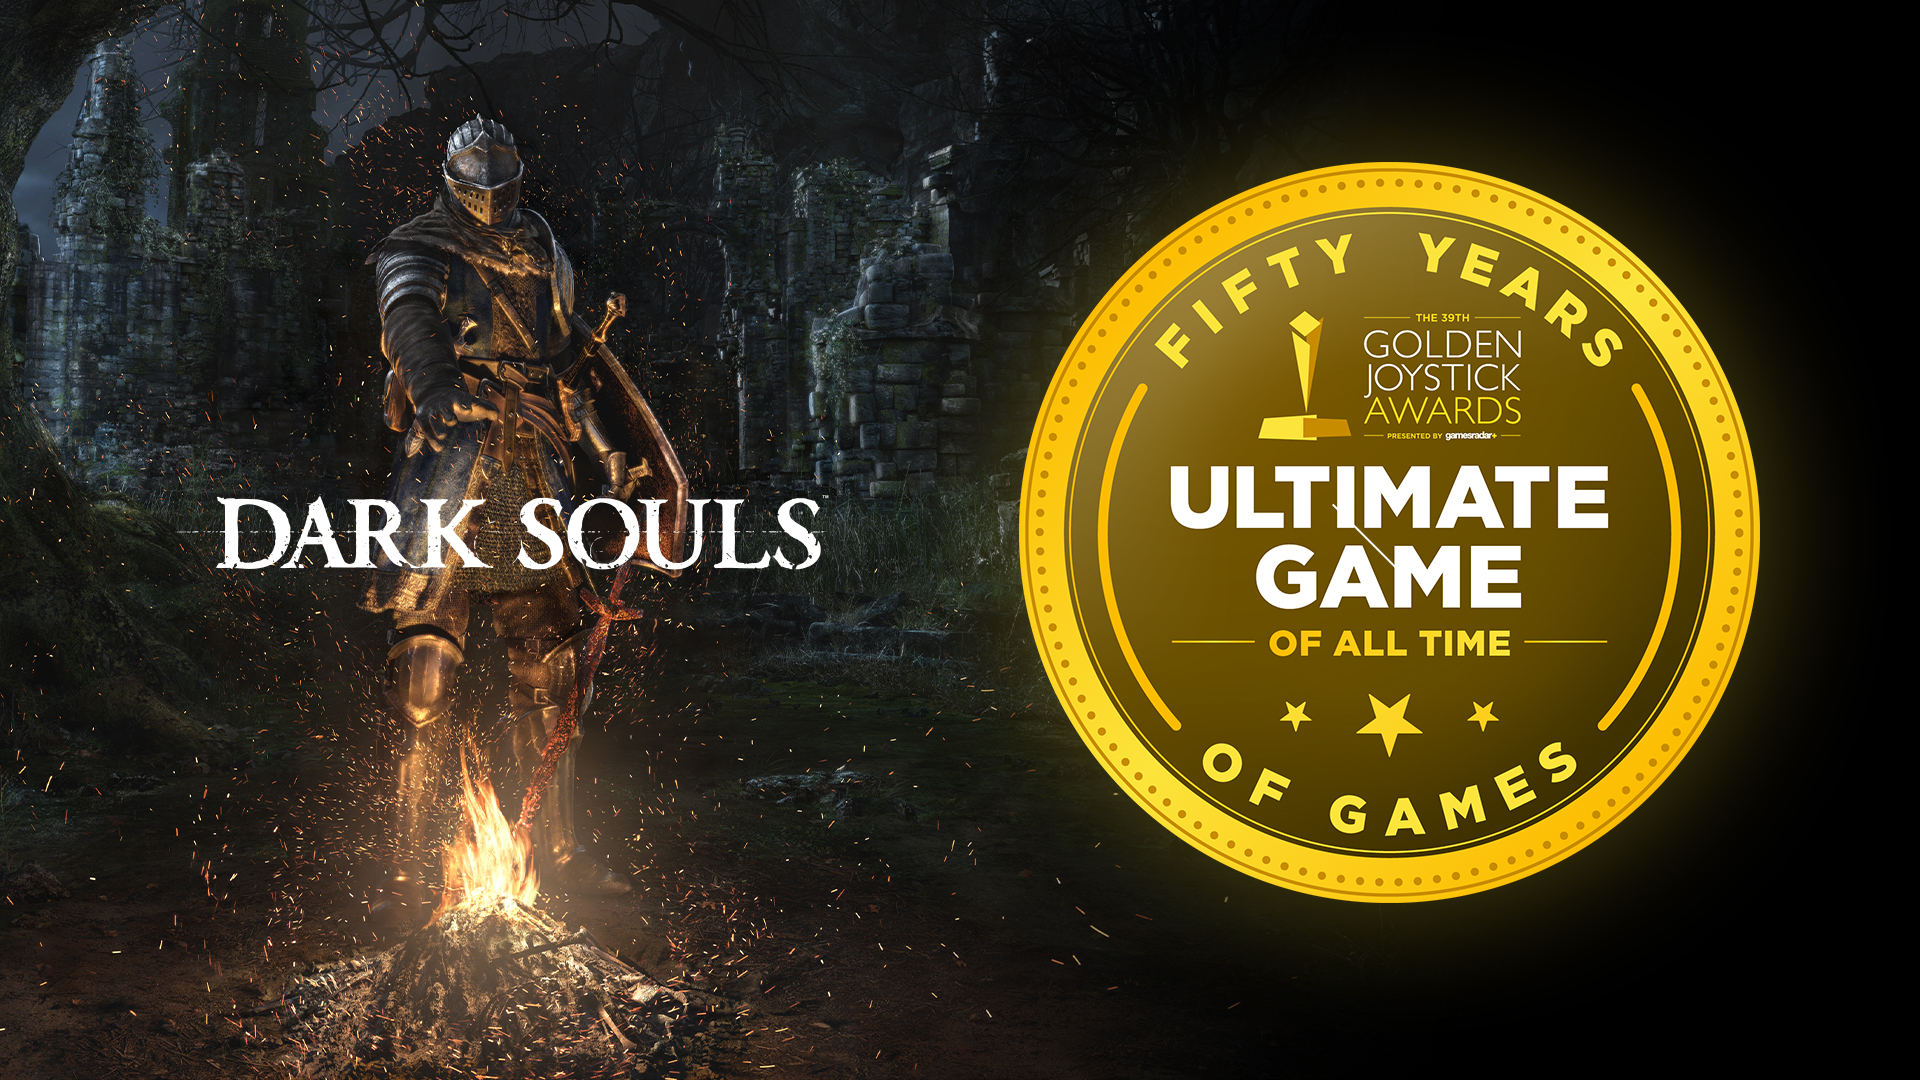 Dark on Twitter: "Thank you for making #DarkSouls the Ultimate Game of All Time at the #GoldenJoystickAwards. are truly humbled! As the fire fades and look back on a